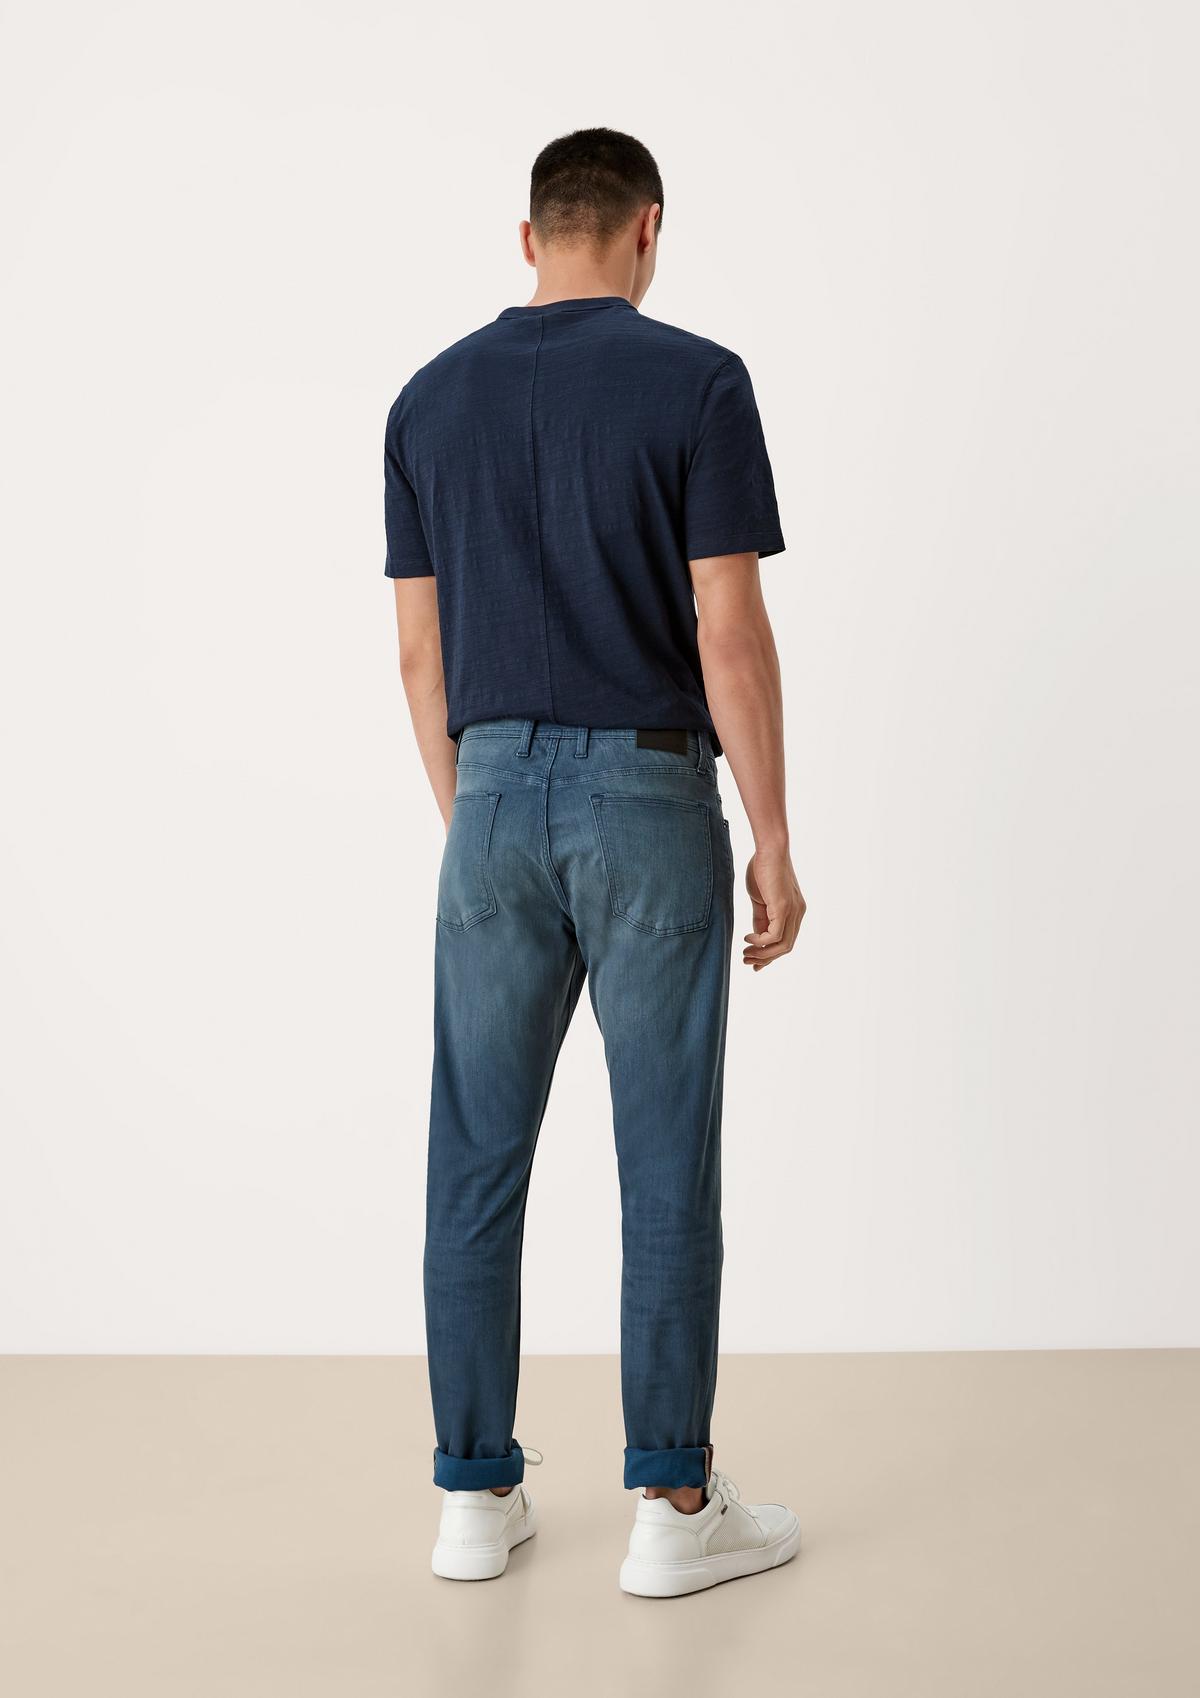 s.Oliver Jeans Keith / Slim Fit / Mid Rise / Tapered Leg